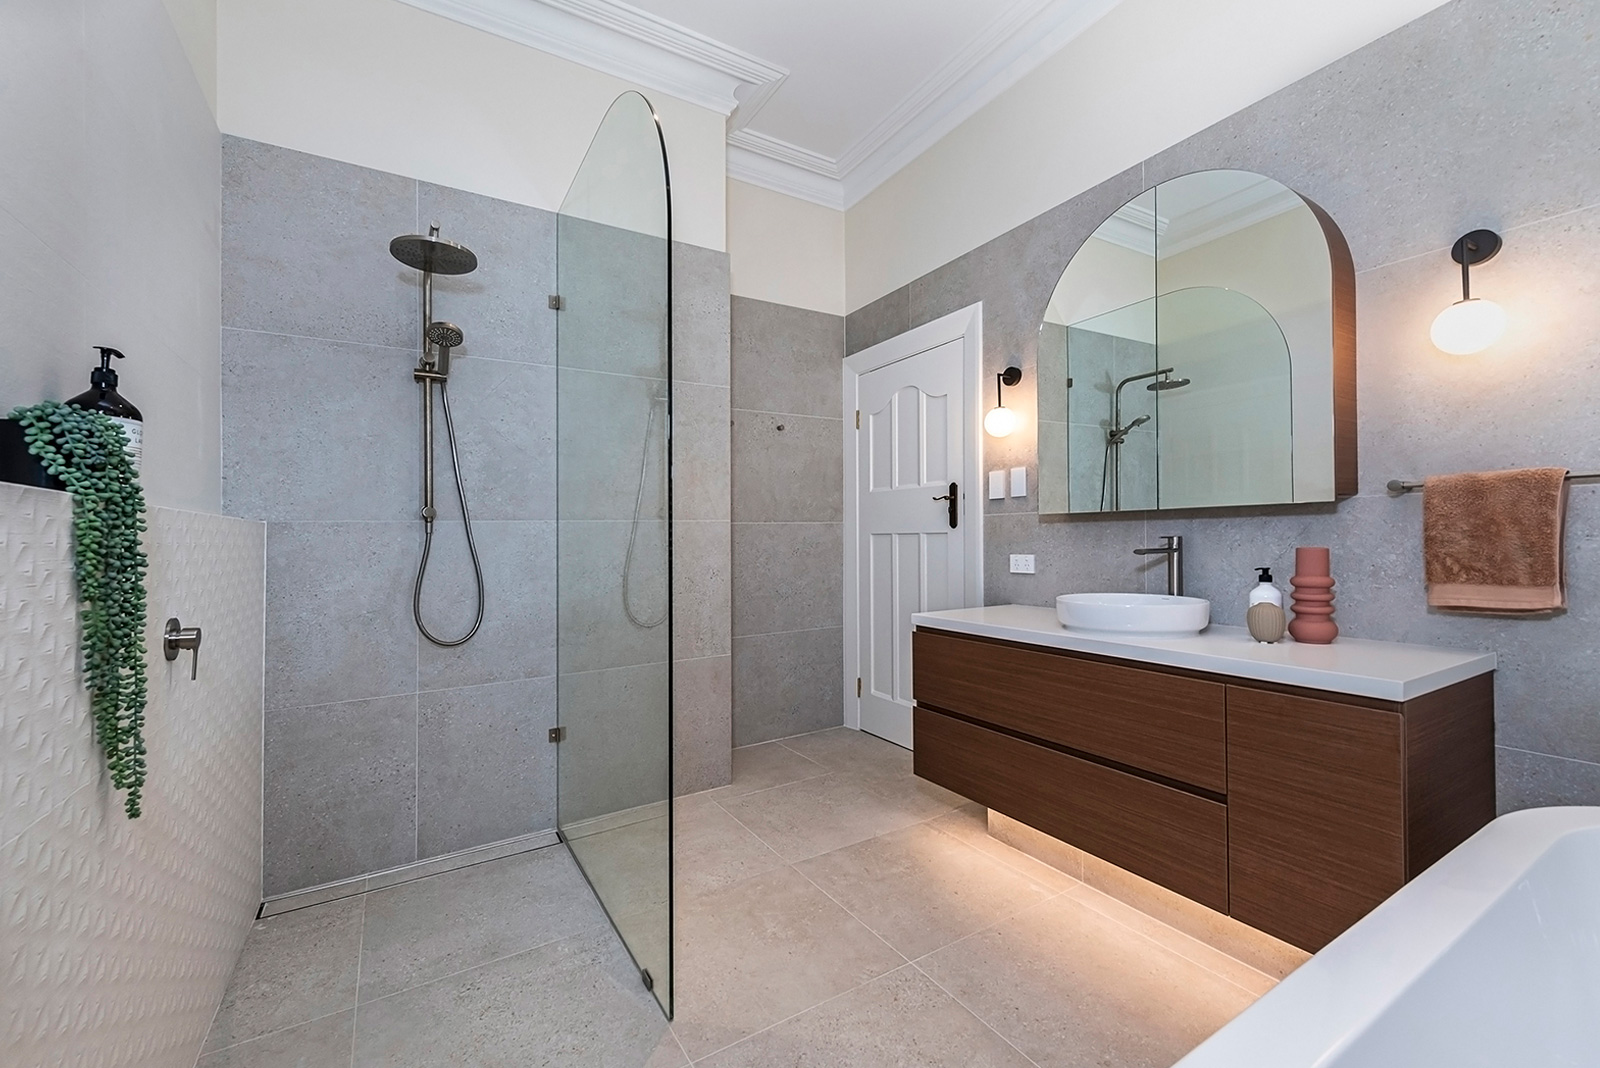 Bathroom in Costtesloe apartment with cabinetry designed by Studio Seventy Four